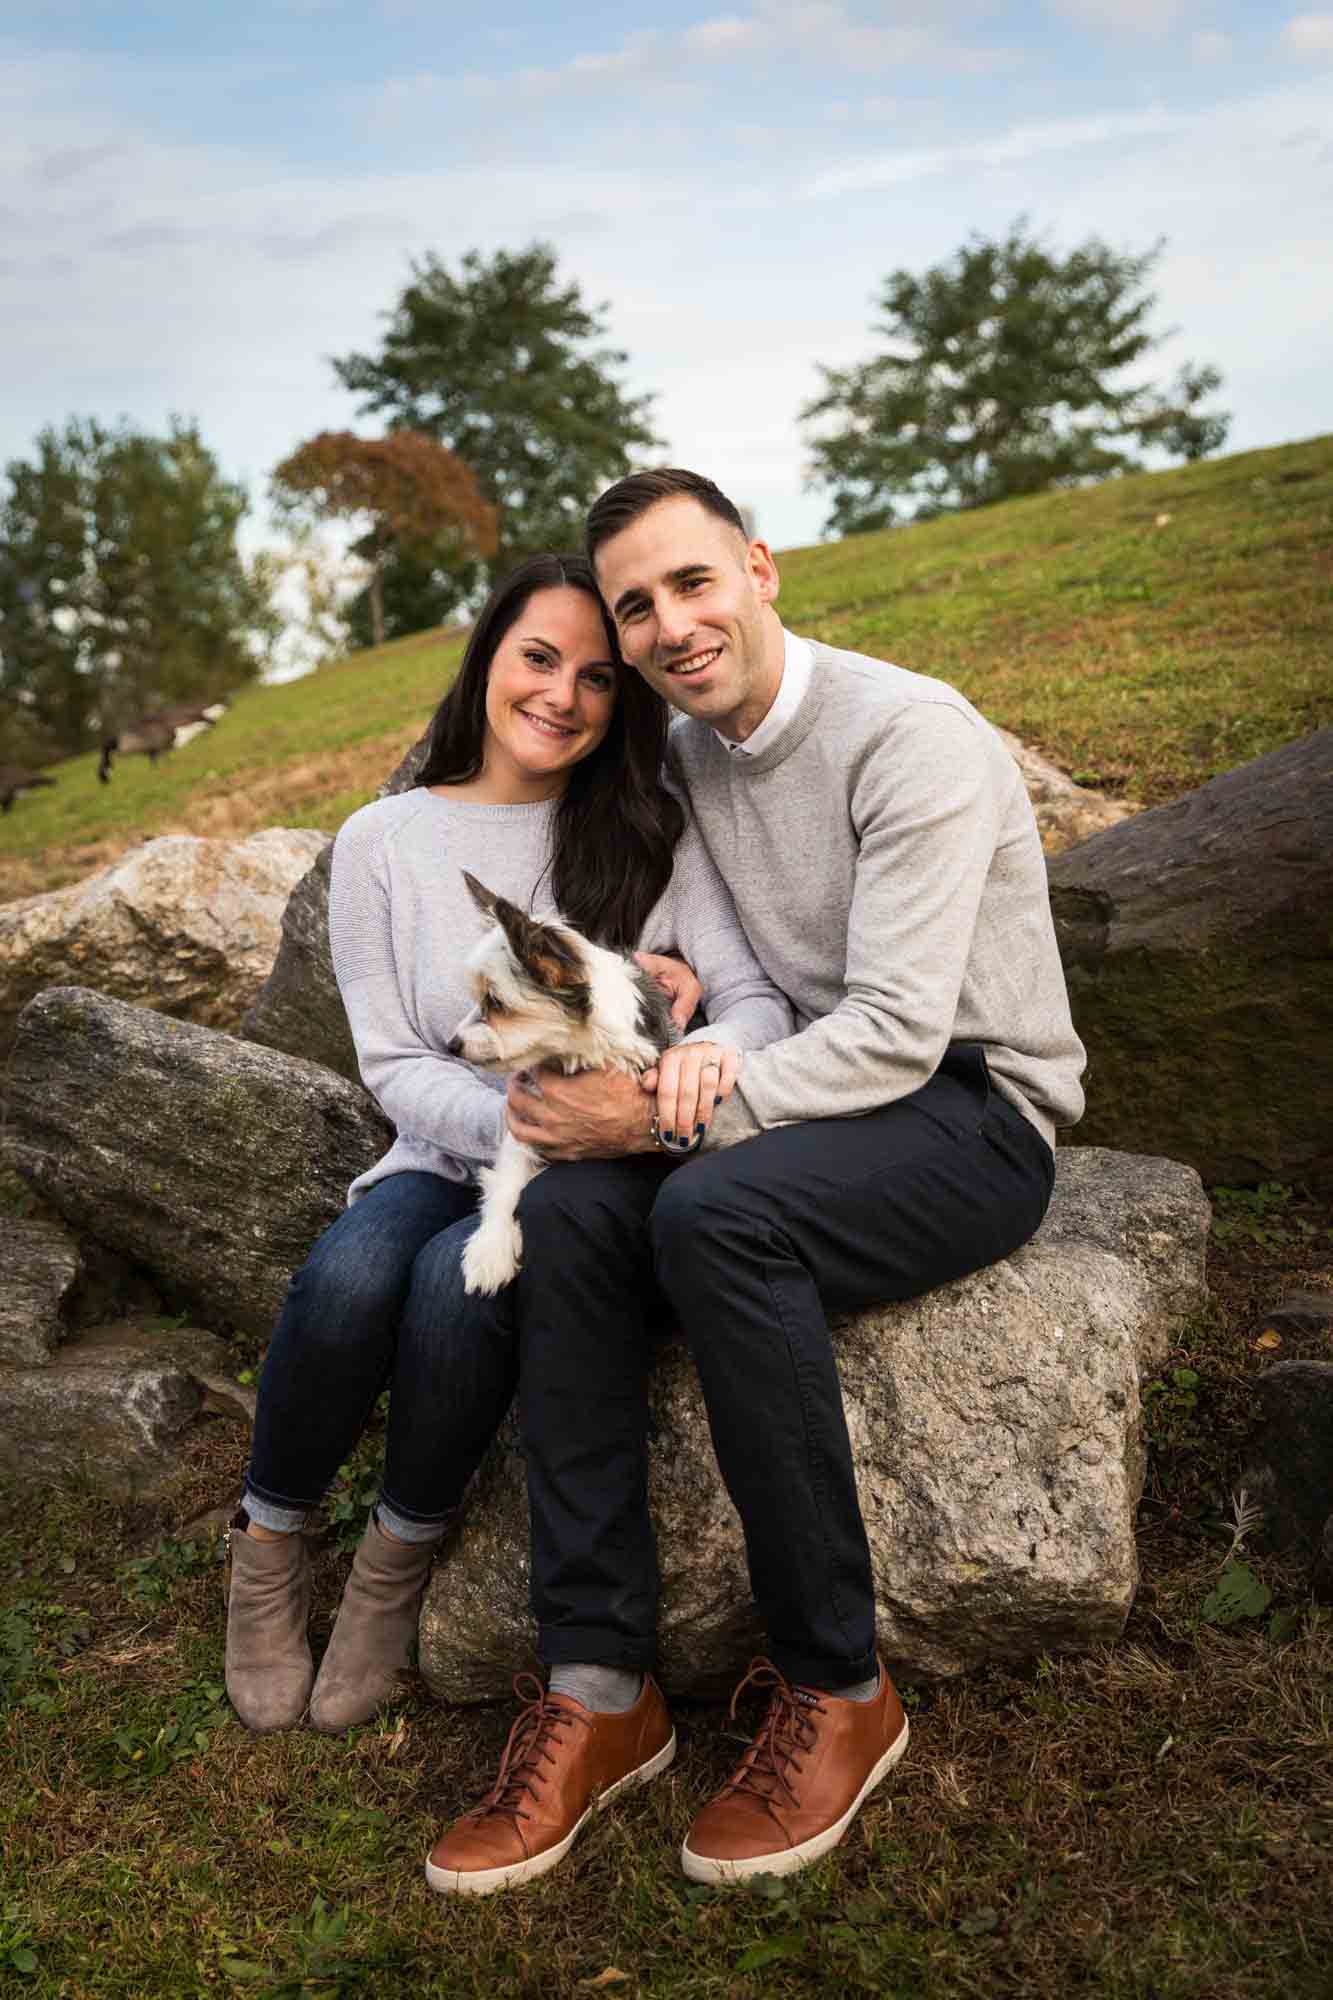 Couple sitting on rock holding dog for an article on pet engagement photo tips